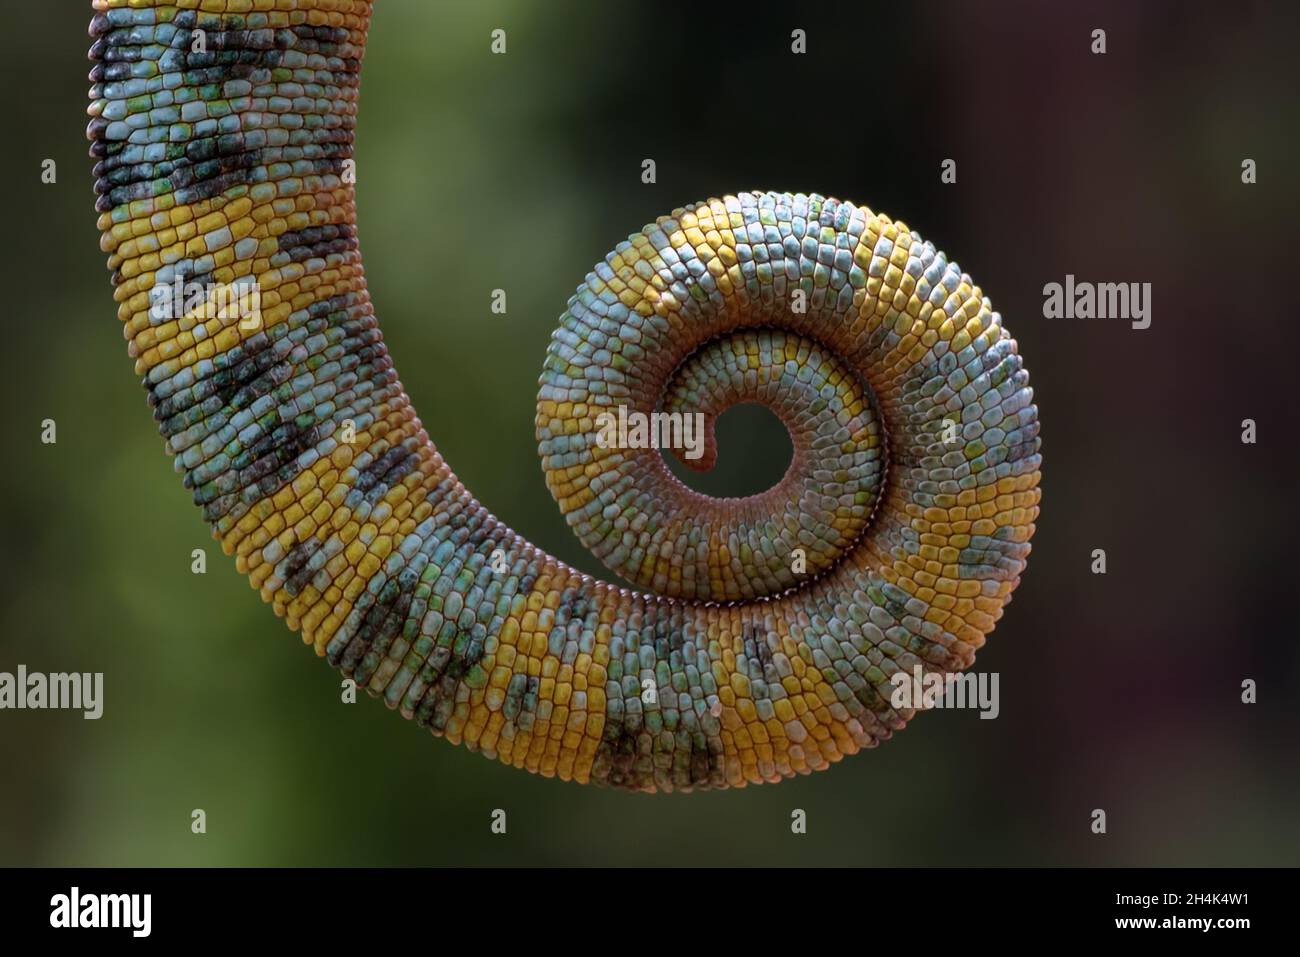 Close-up of a coiled veiled chameleon tail, Indonesia Stock Photo